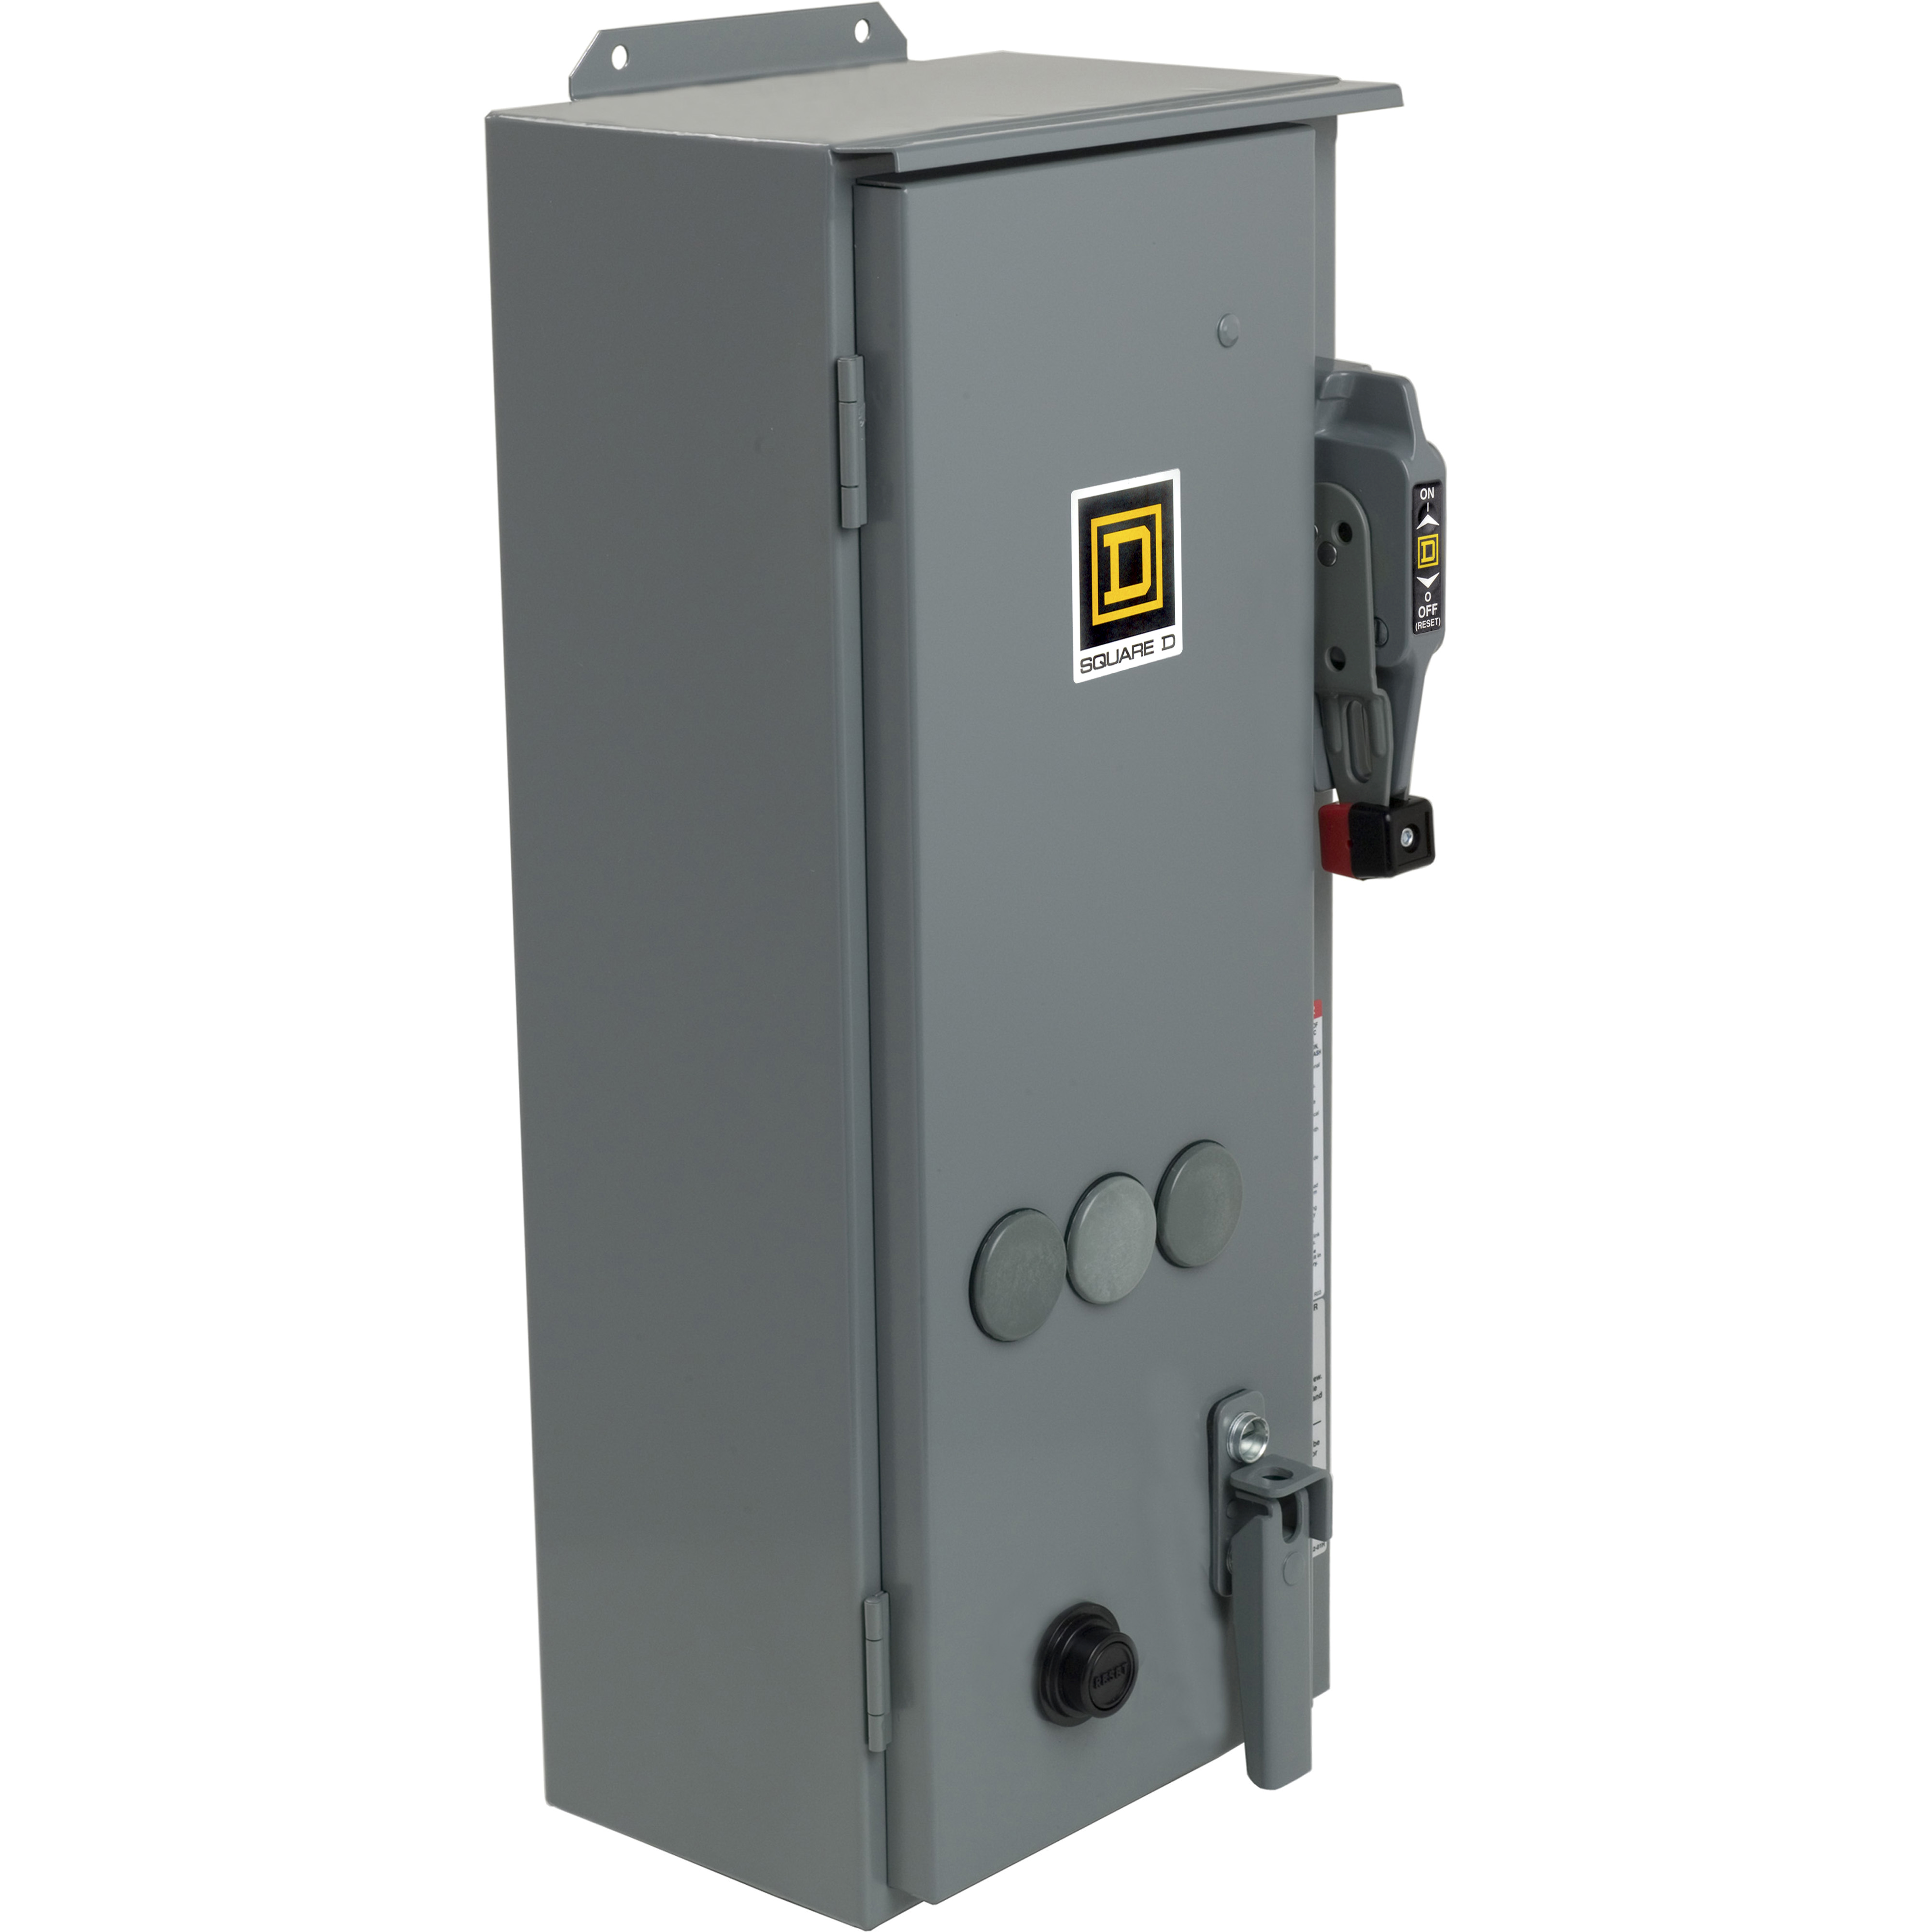 NEMA Combination Starter, Type S, 25A HHL thermal magnetic circuit breaker, Size 1, 27A, 3 phase, 600 VAC coil, NEMA 12